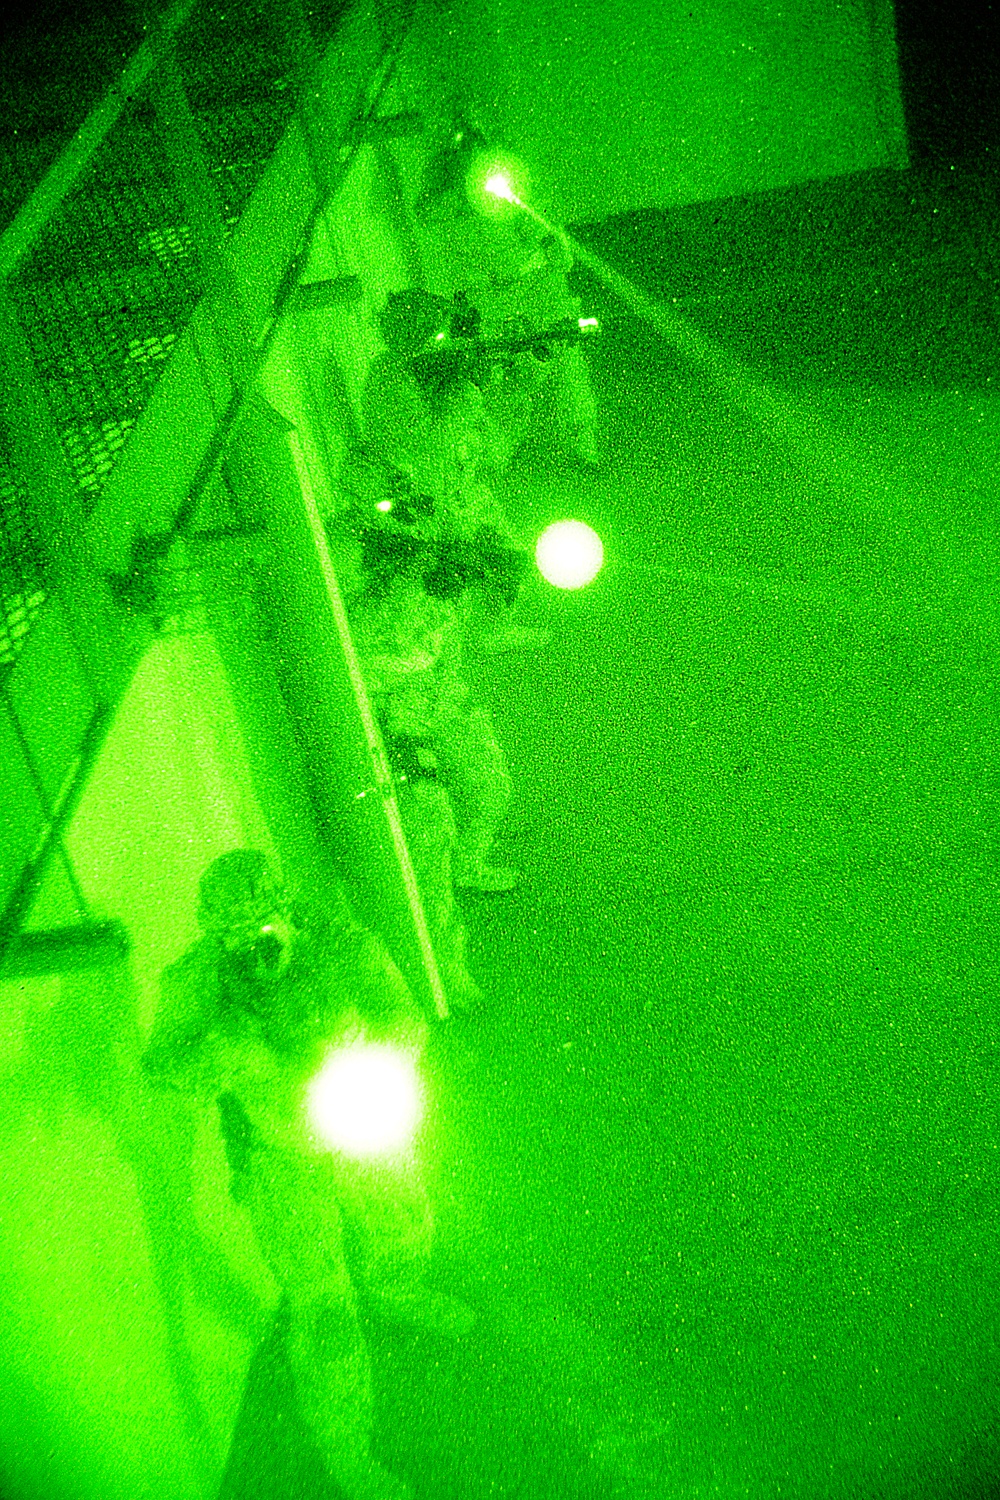 Naval Special Warfare reservists from a West Coast-based SEAL Team conducted a field training exercise